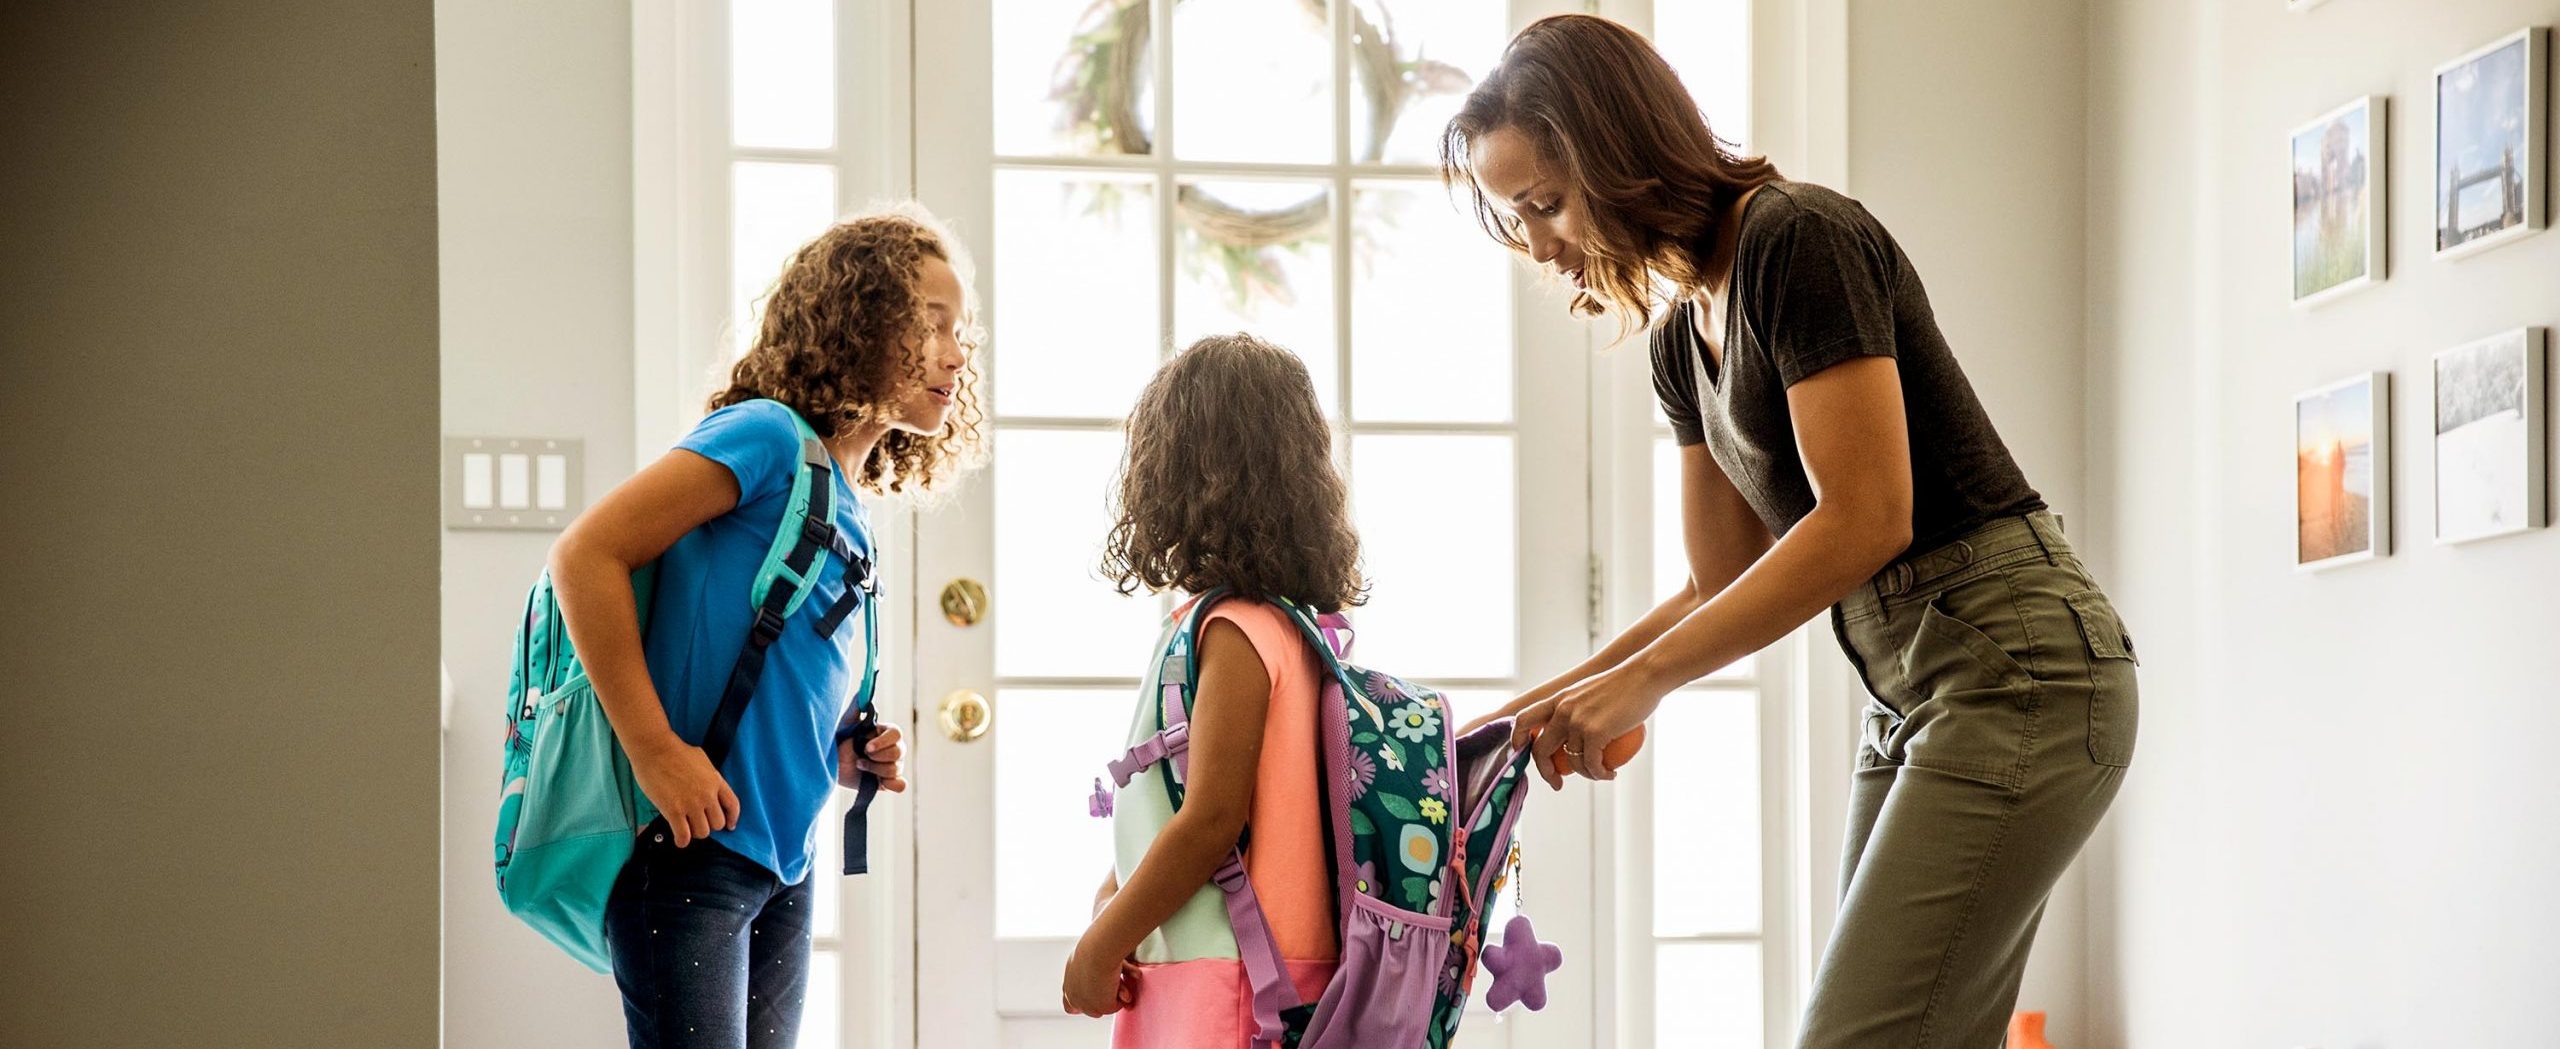 Standing in an entryway, a woman zips her young daughter’s backpack as another daughter looks on.